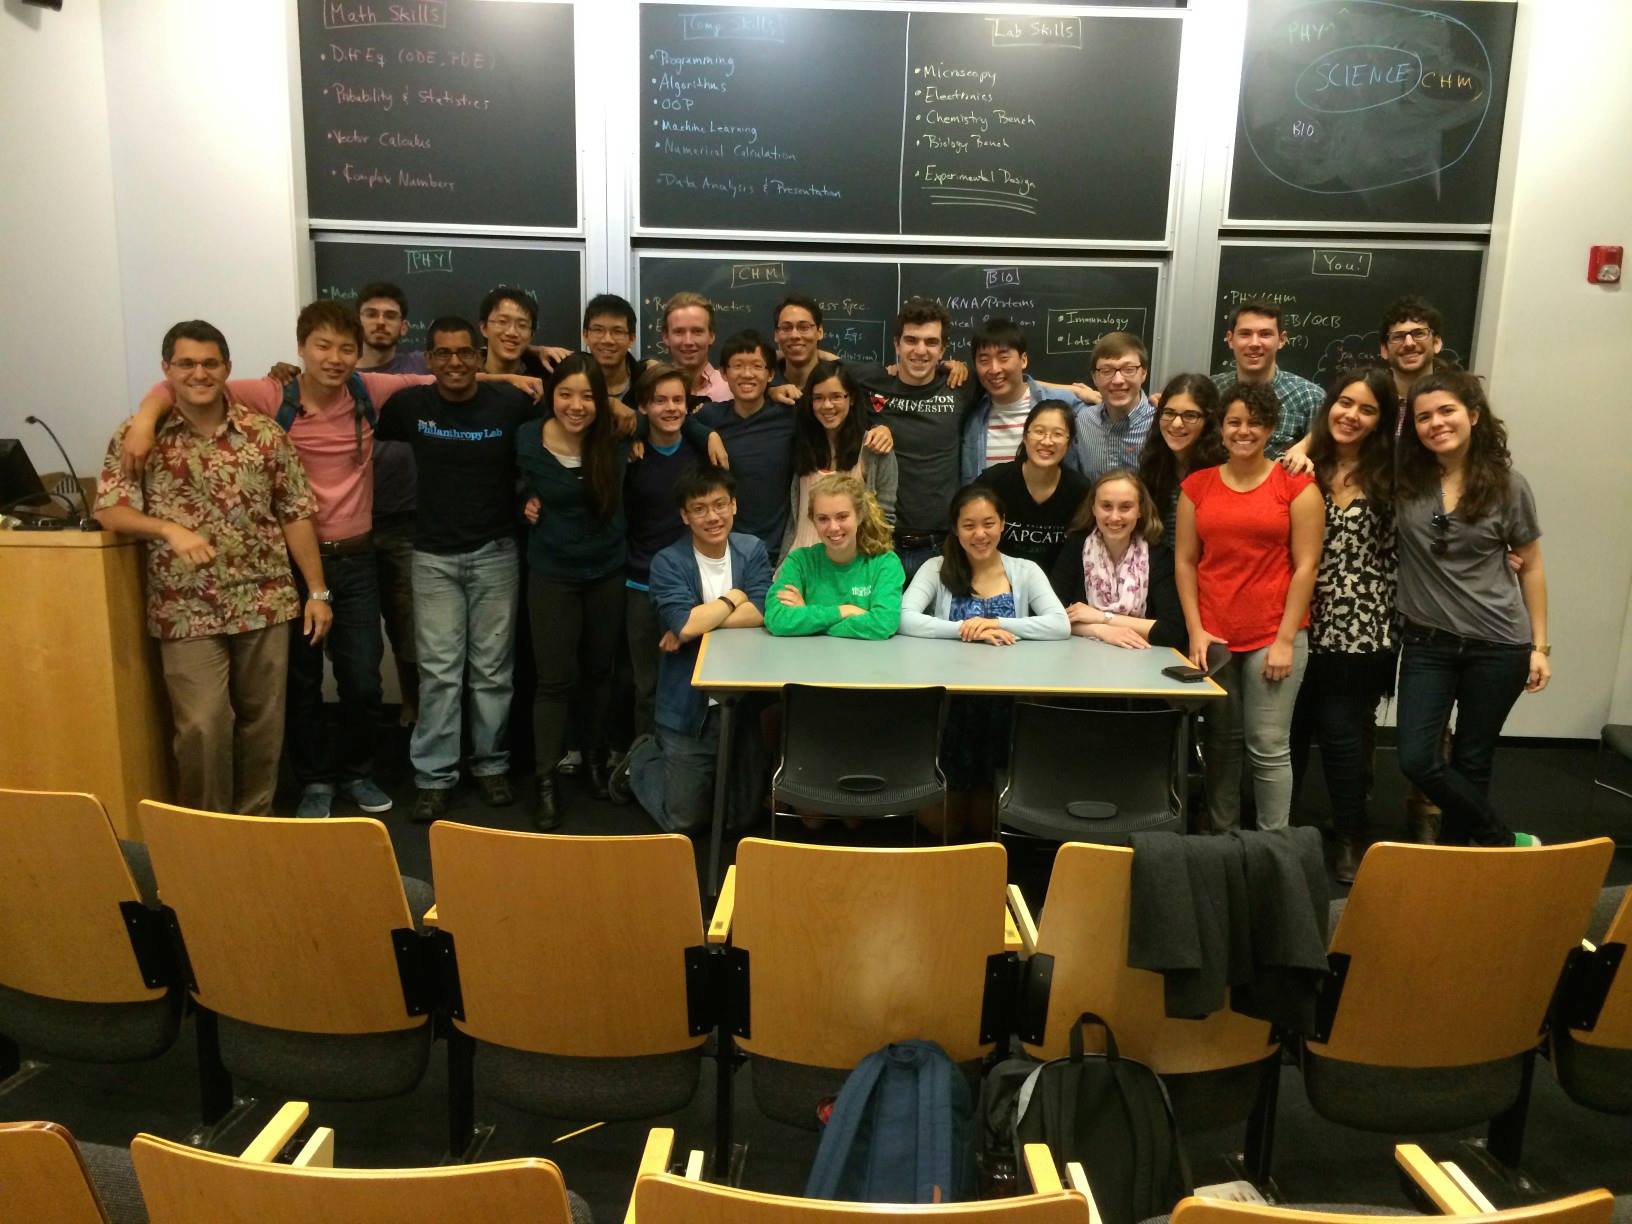 Students and teachers in front of a blackboard